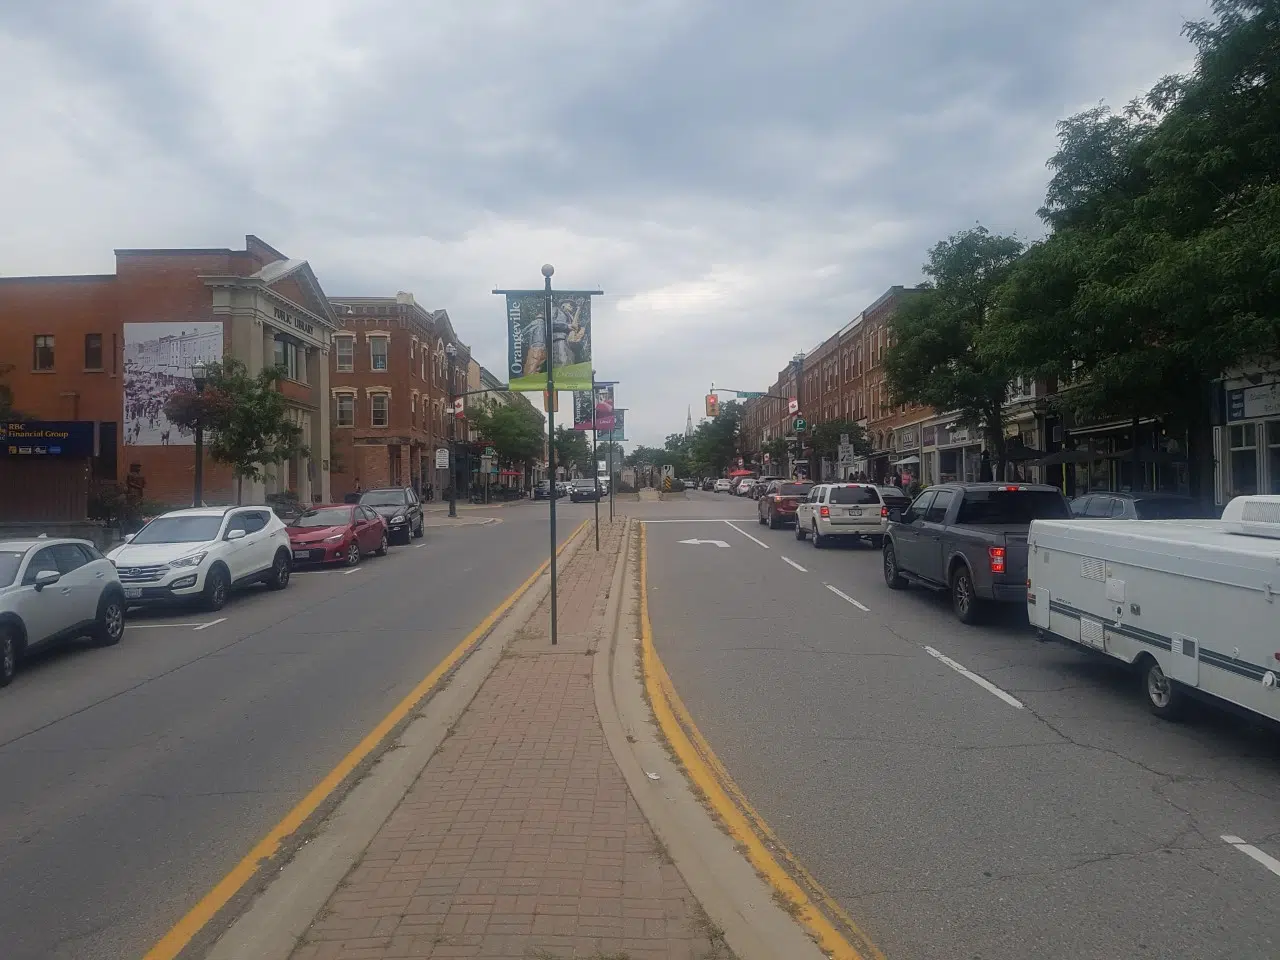 Downtown Orangeville's 'Shop the Sidewalk' event to showcase over 30 locally owned businesses this weekend